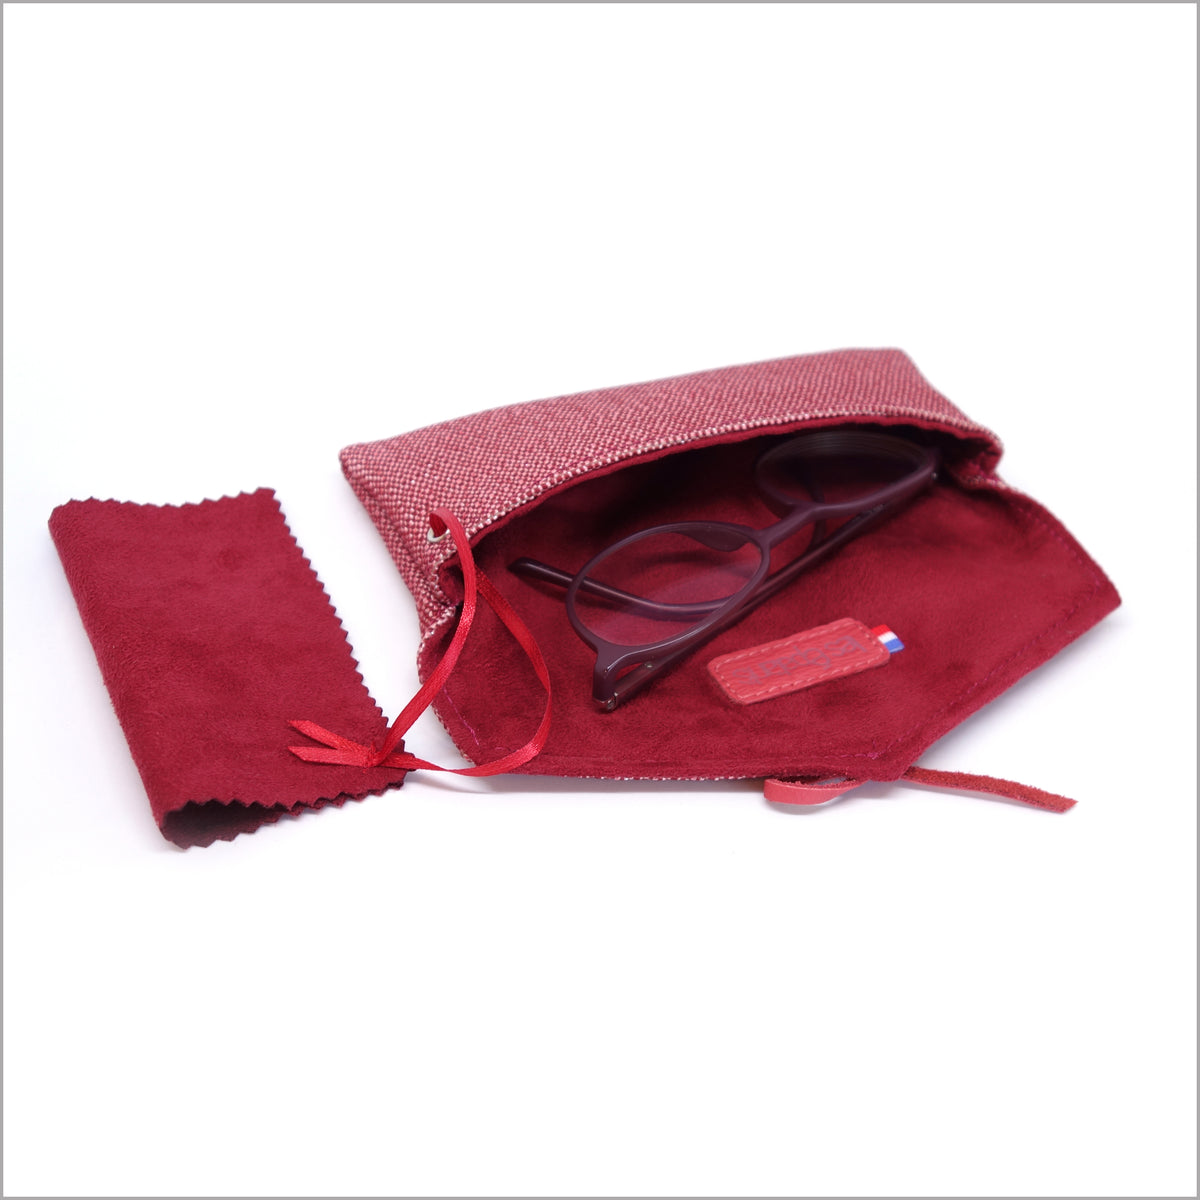 Soft glasses case in raspberry linen and silver lurex